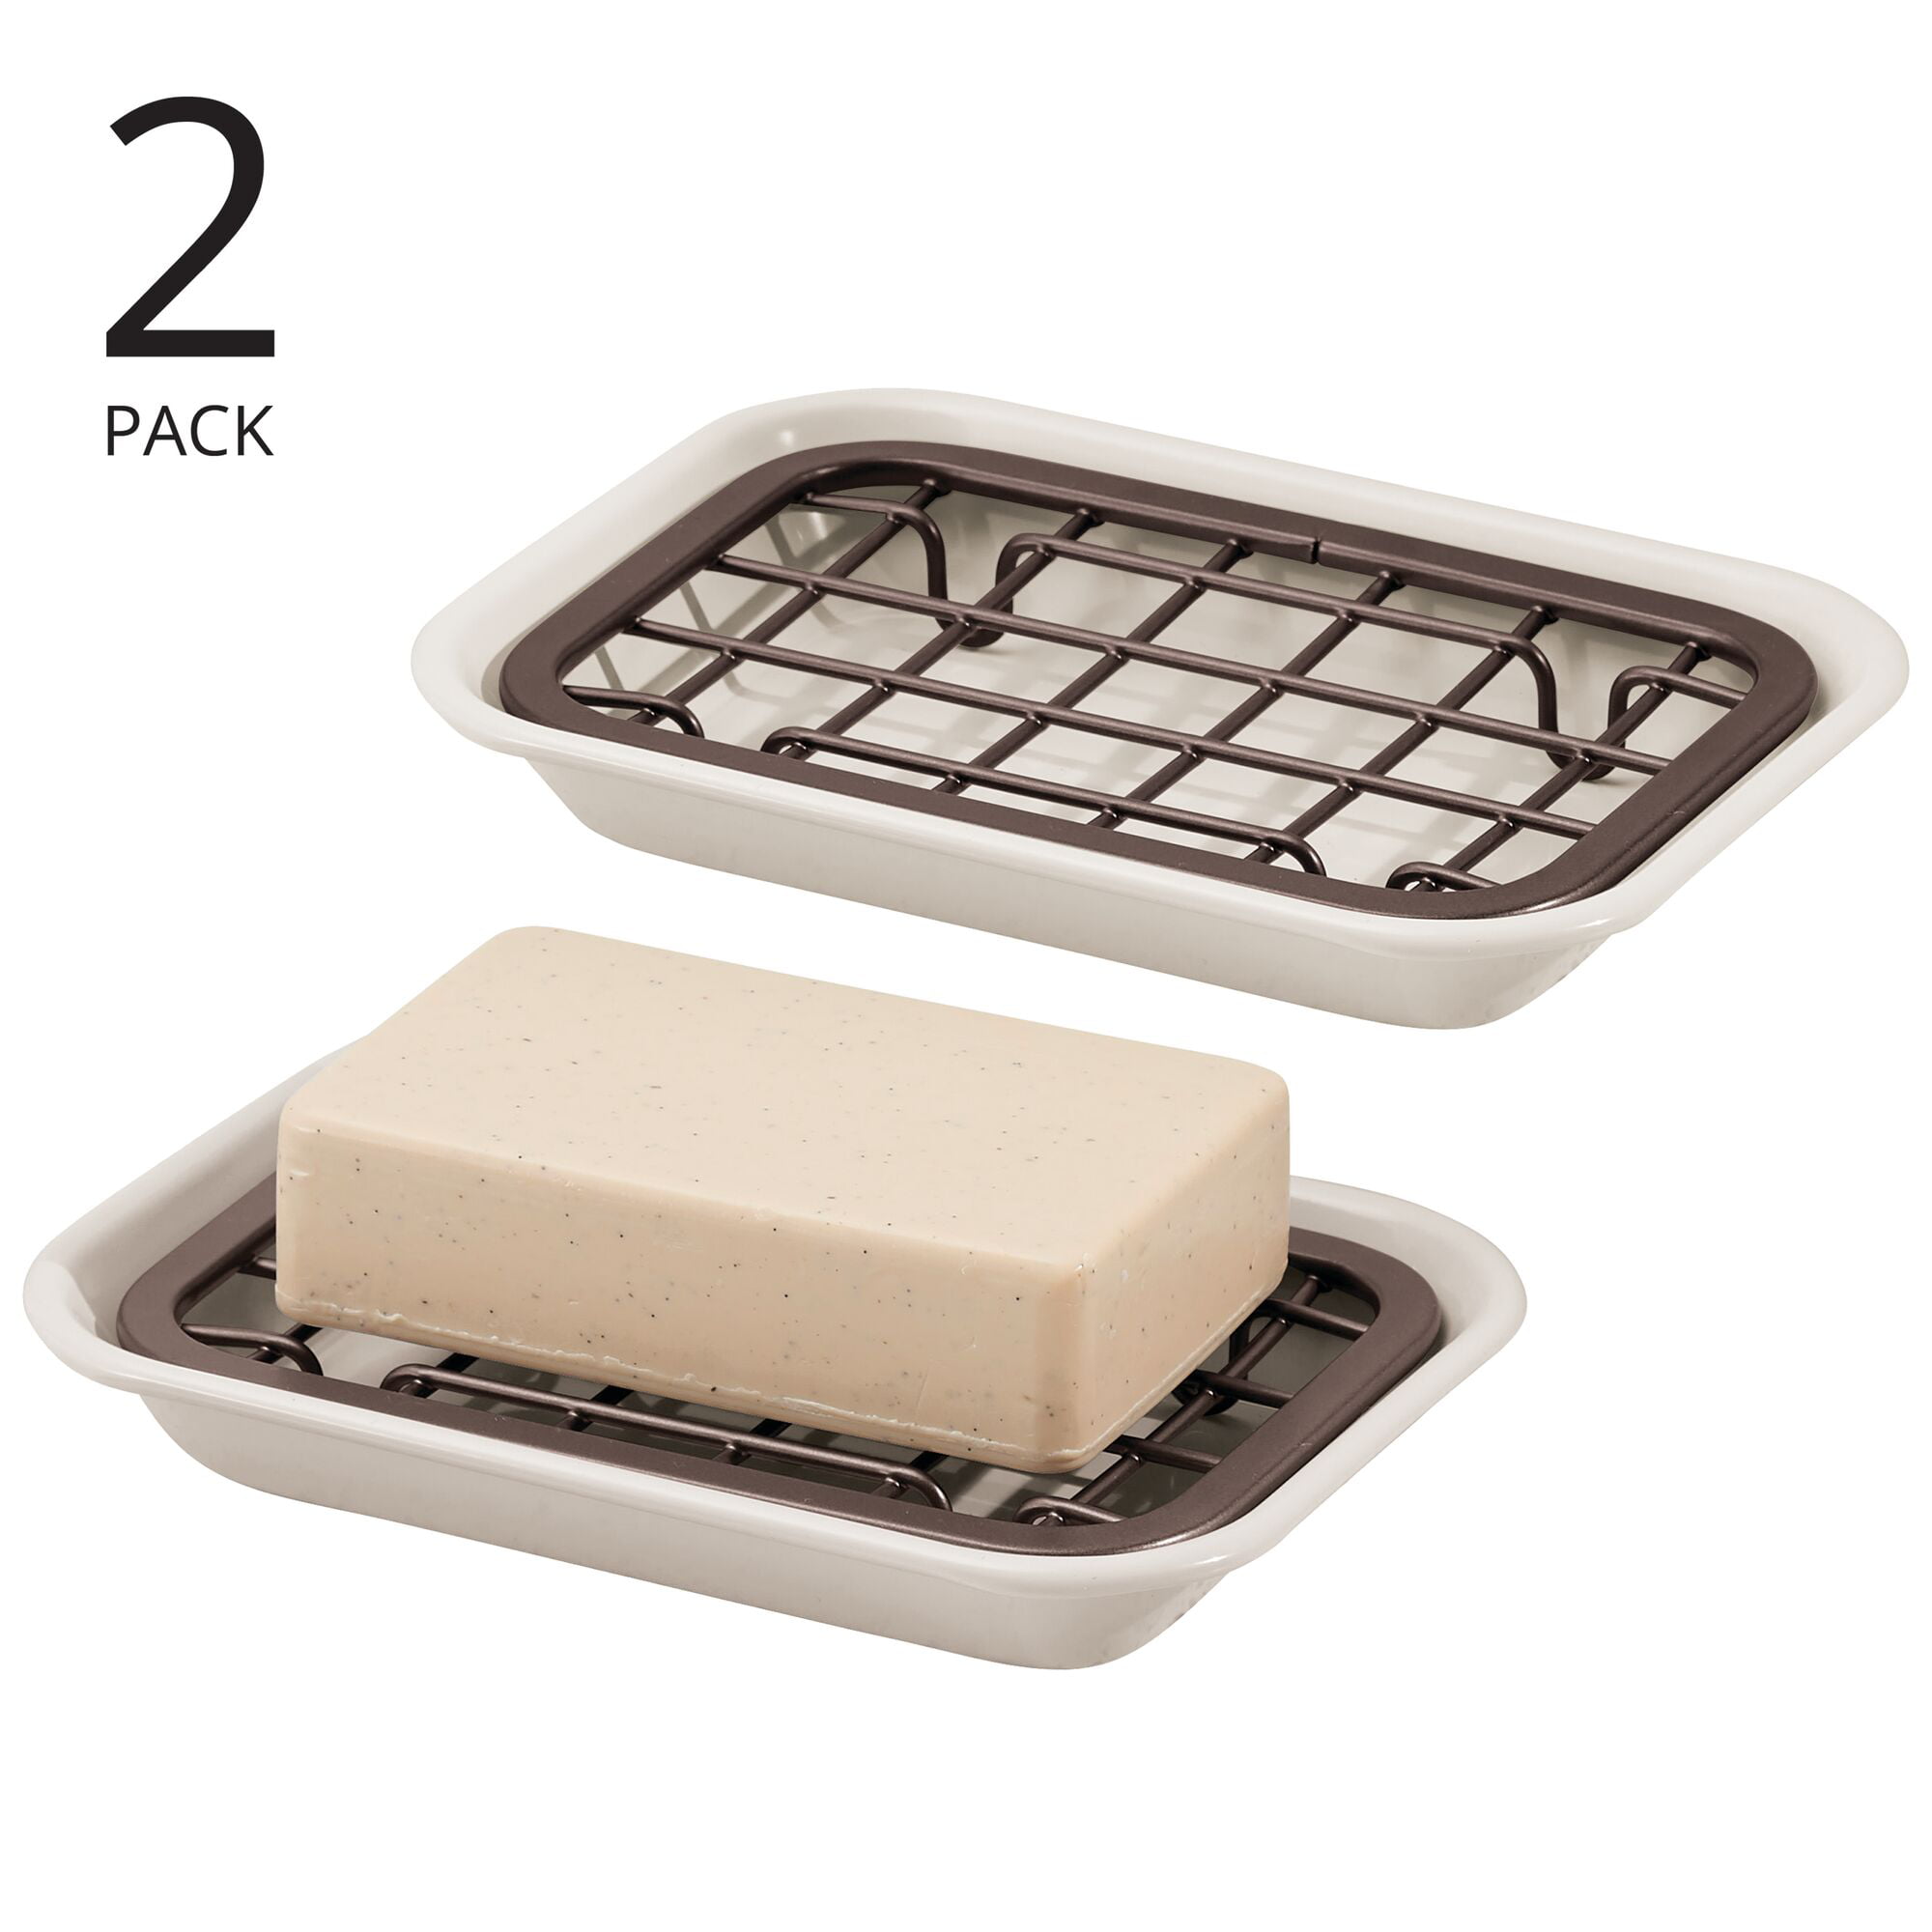 mDesign 2-Piece Dish Sponge Tray for Kitchen Sink - Polished Stainless Steel